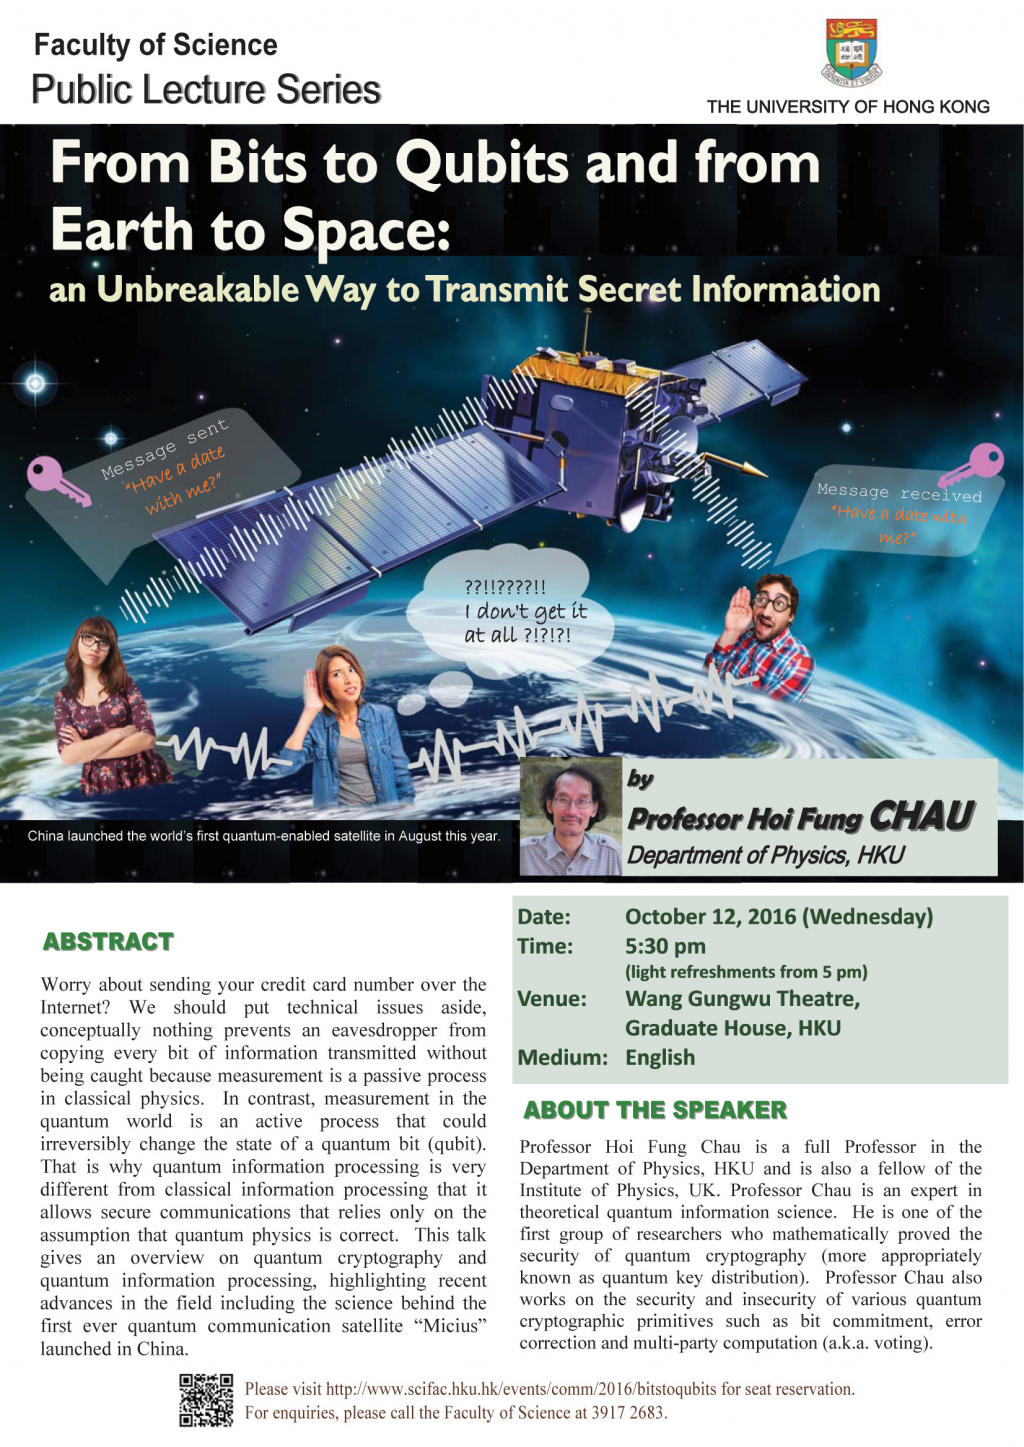 Public Lecture: From Bits to Qubits and from Earth to Space: an Unbreakable Way to Transmit Secret Information